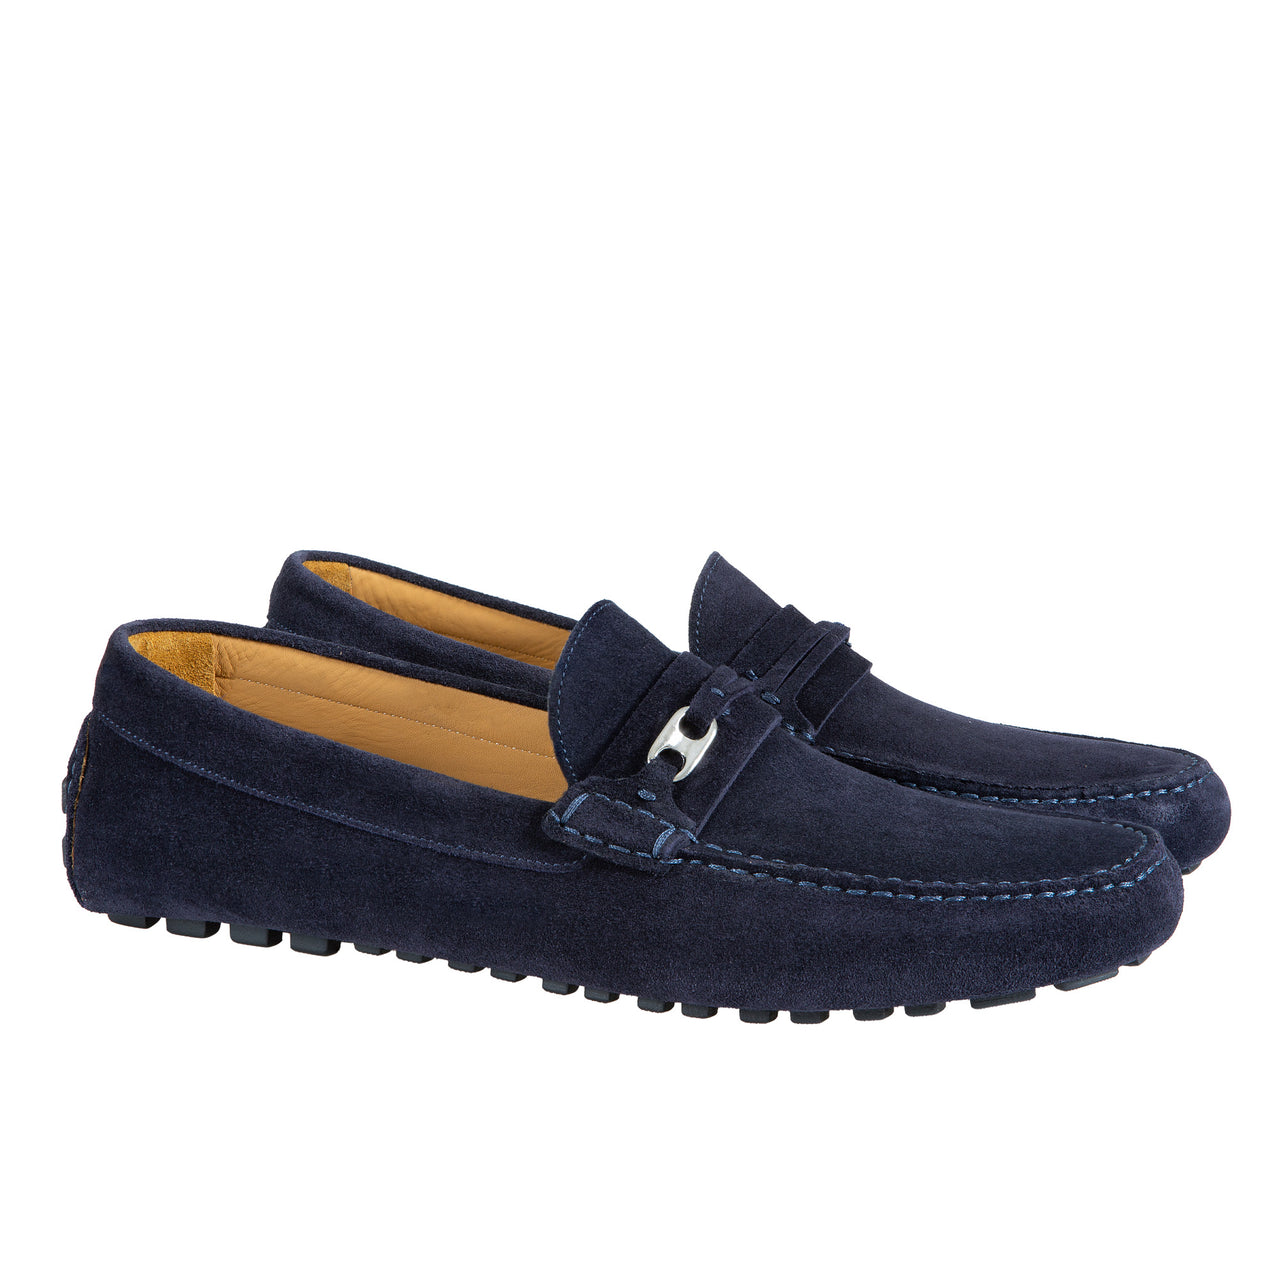 HENRY SARTORIAL Calf Driving Shoes with Metal Trim NAVY